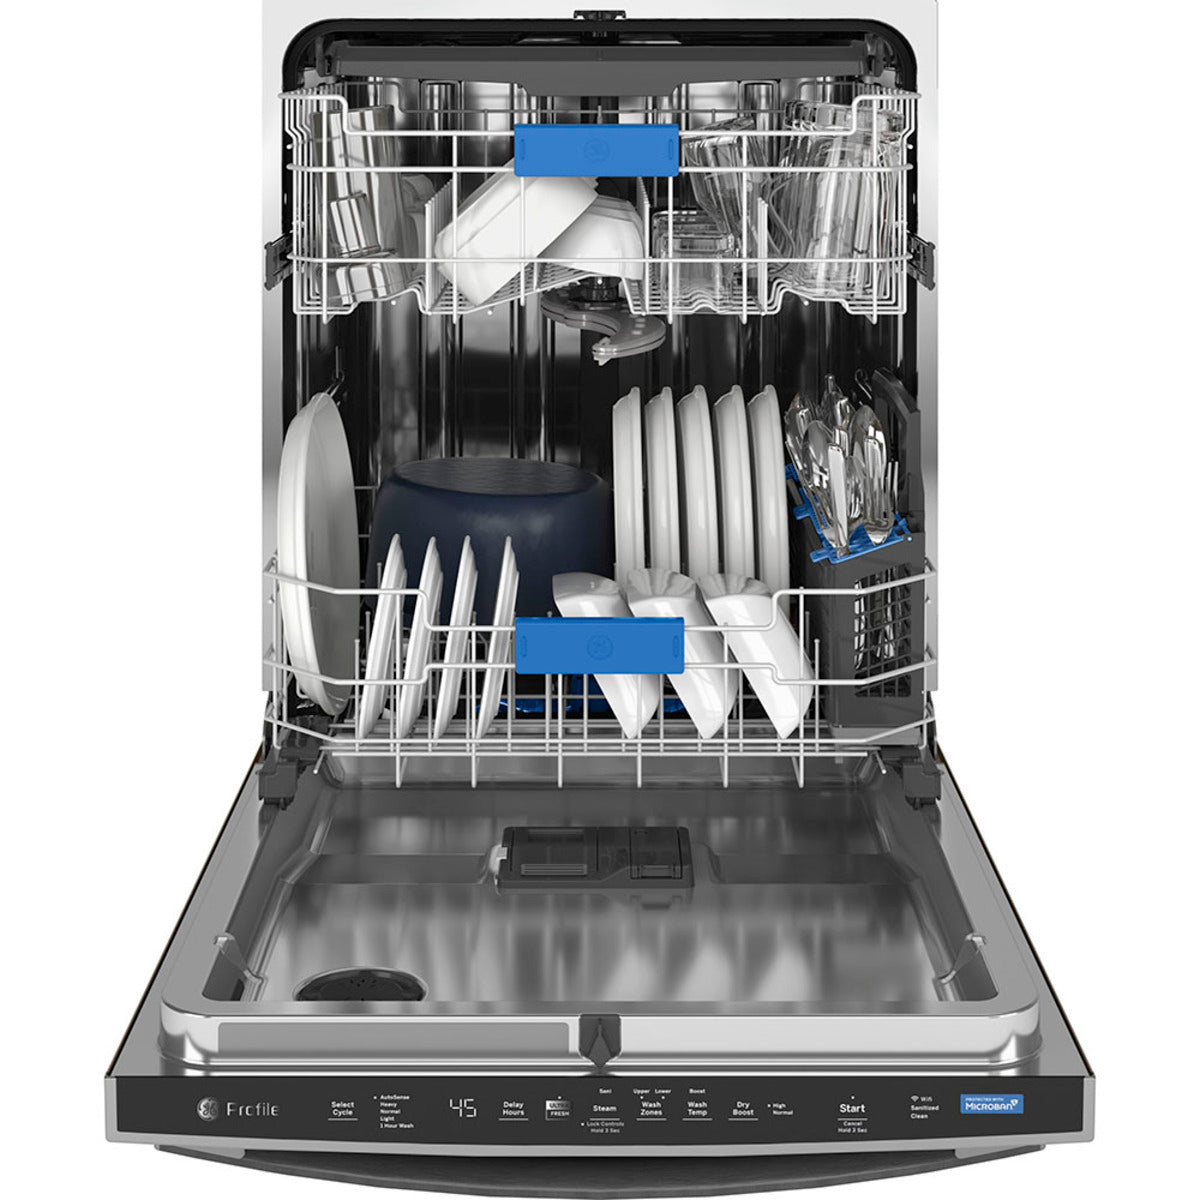 GE Profile - 42 dBA Built In Dishwasher in Stainless - PDT755SYRFS